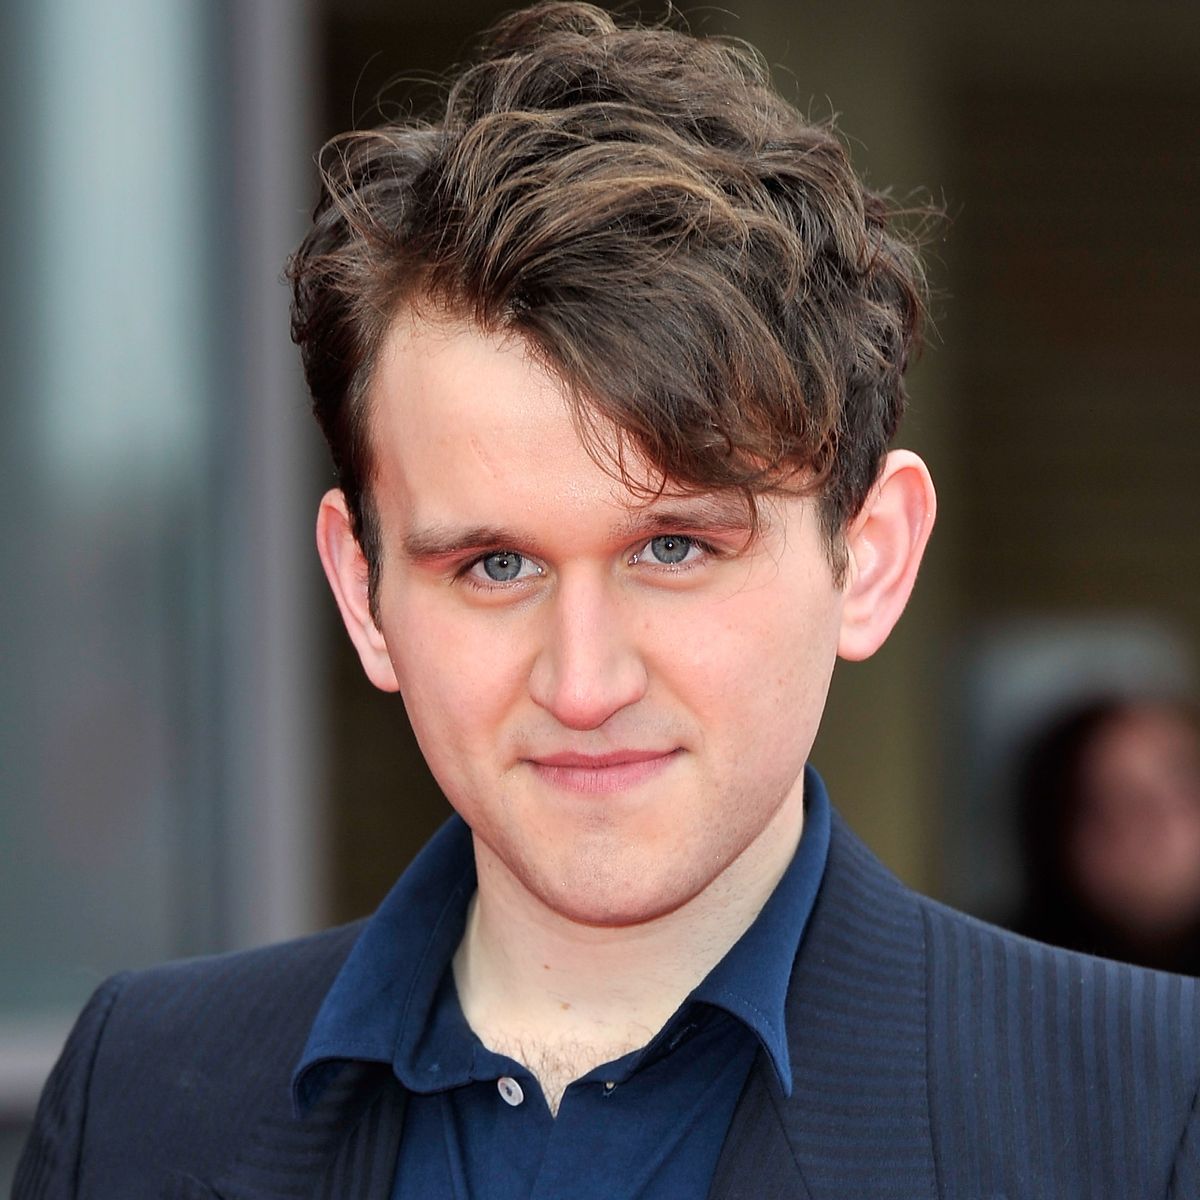 Who Played Dudley Dursley In The Harry Potter Films?